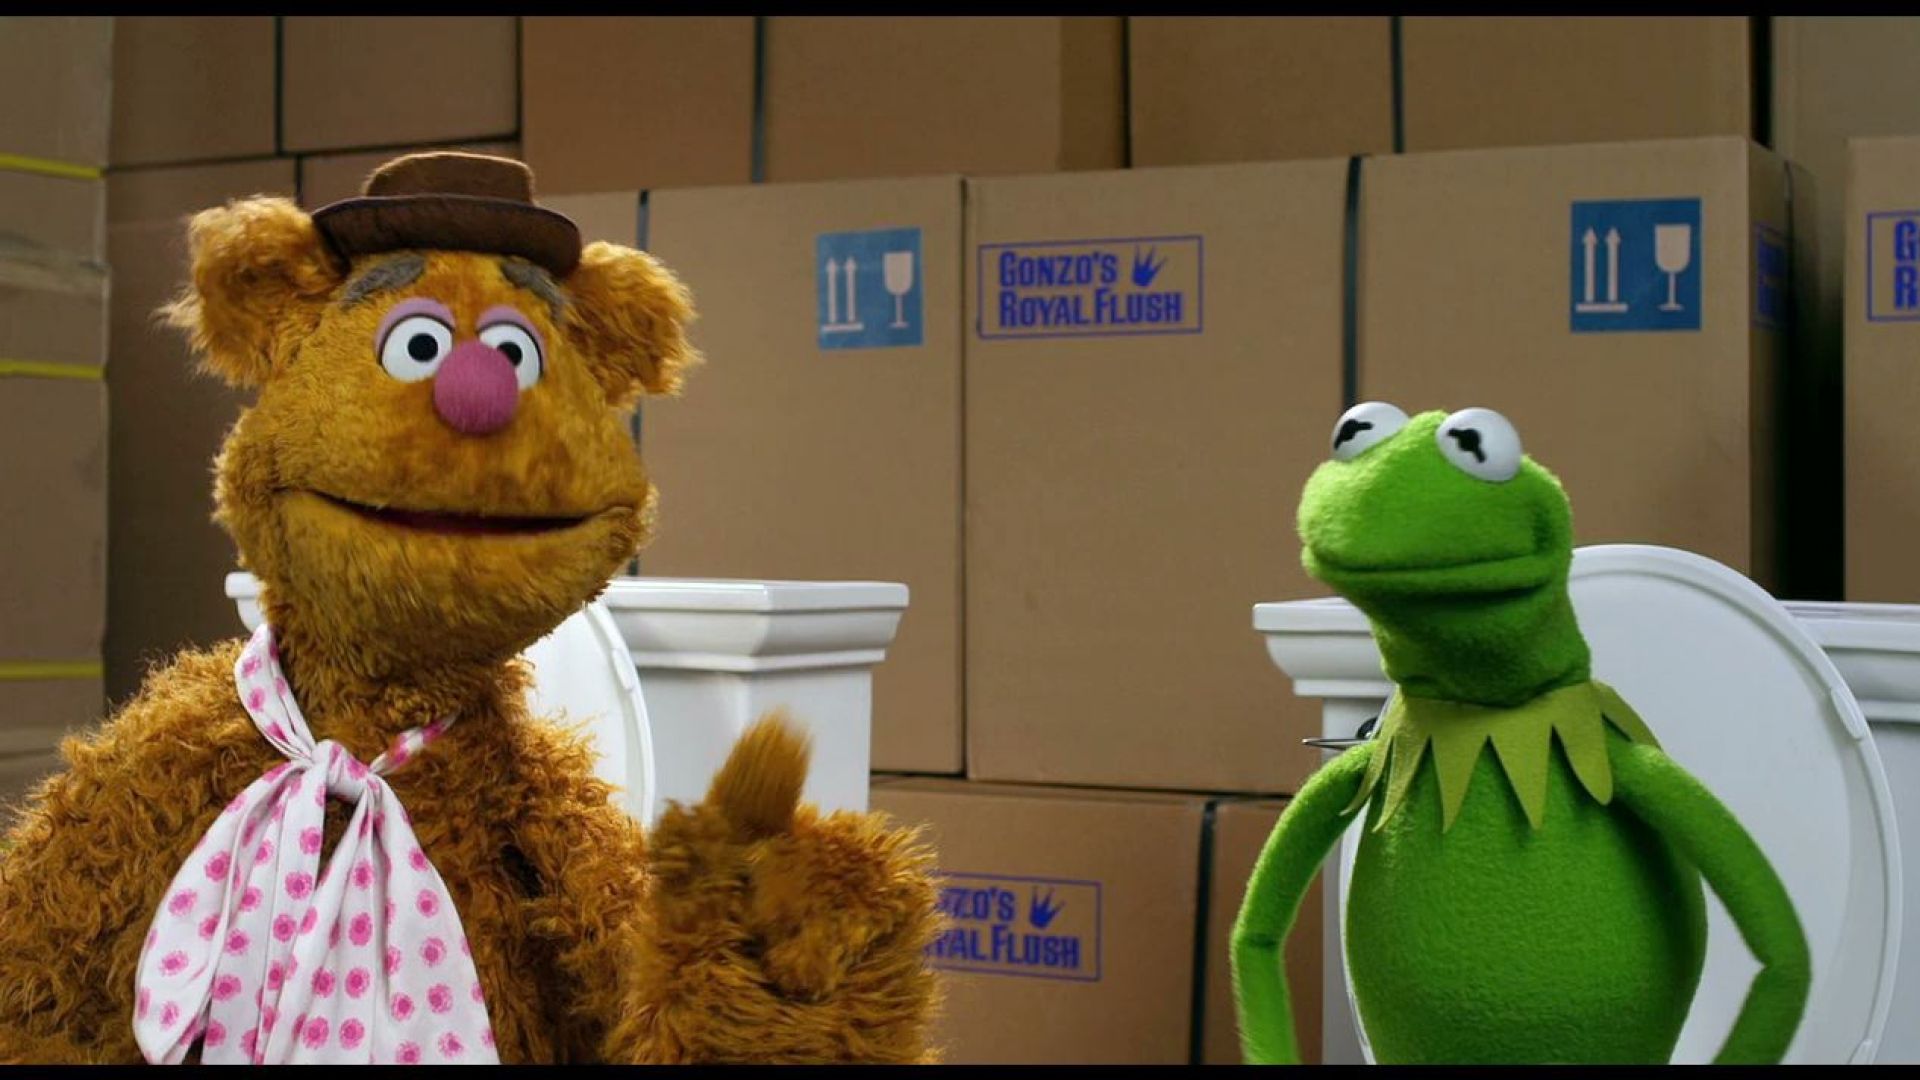 The Muppets are about artistic integrity